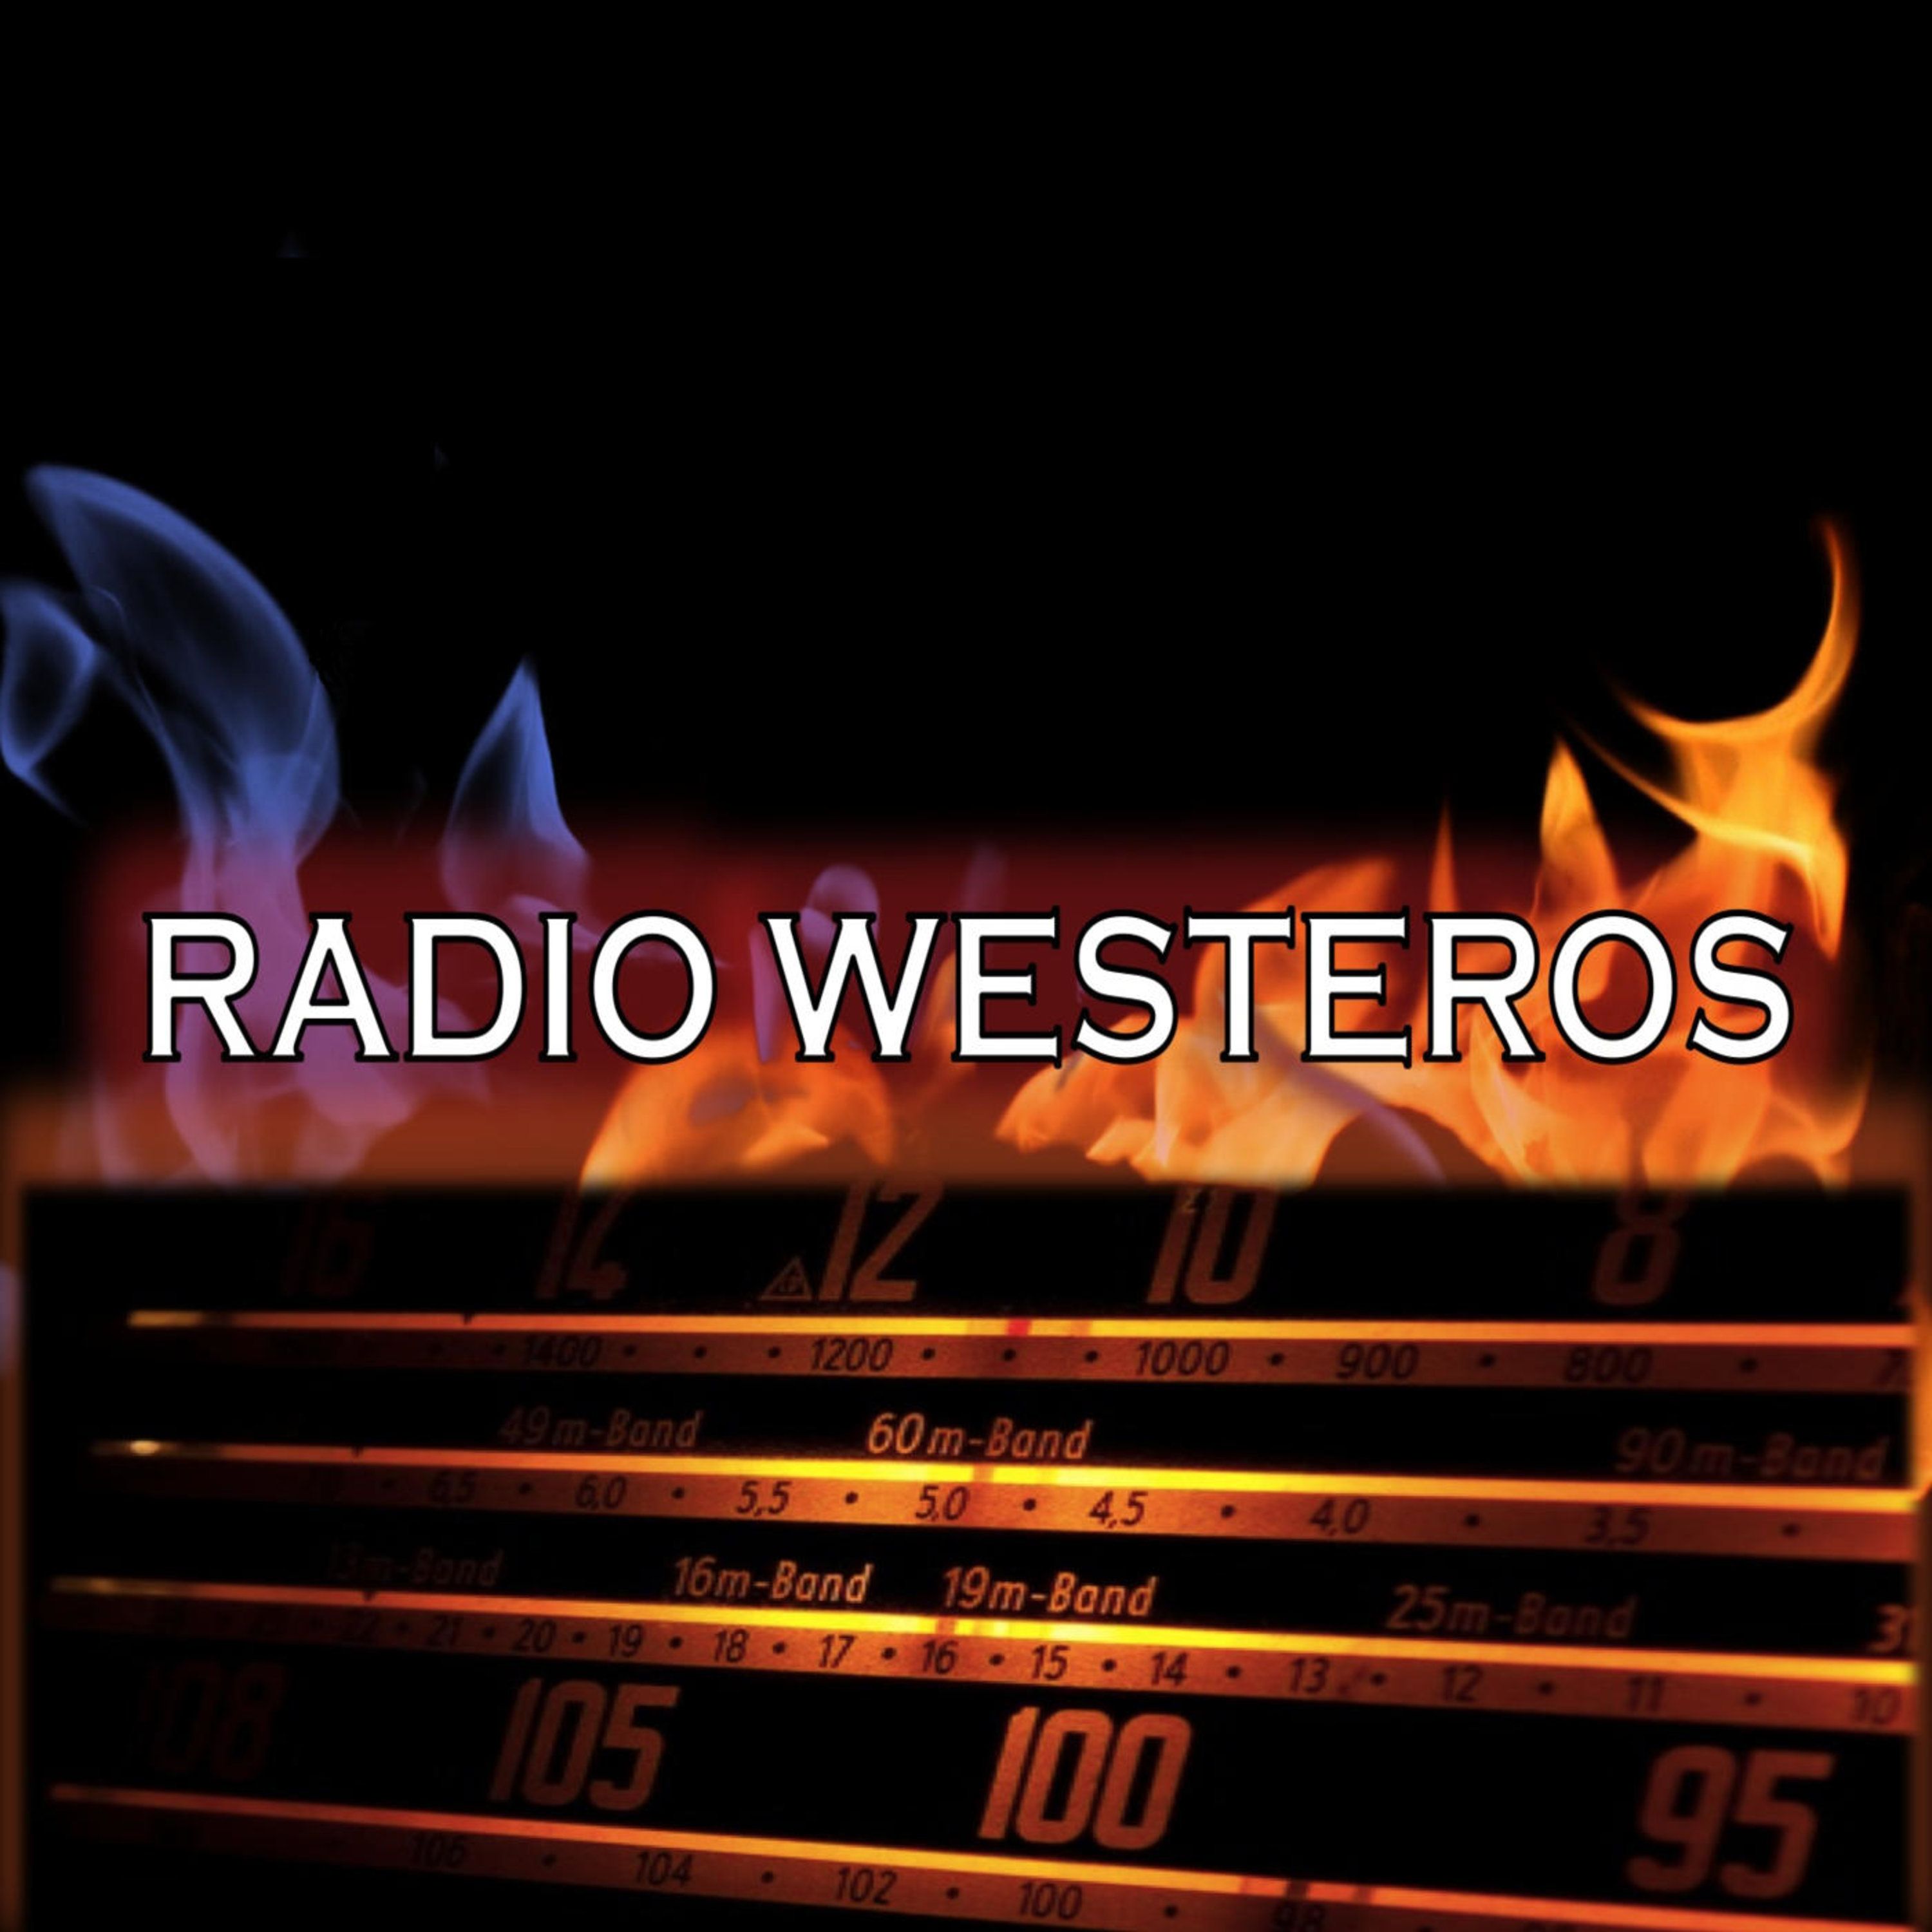 Radio Westeros E33 War of the Five Kings, part 1 - The Wolf and the Lion